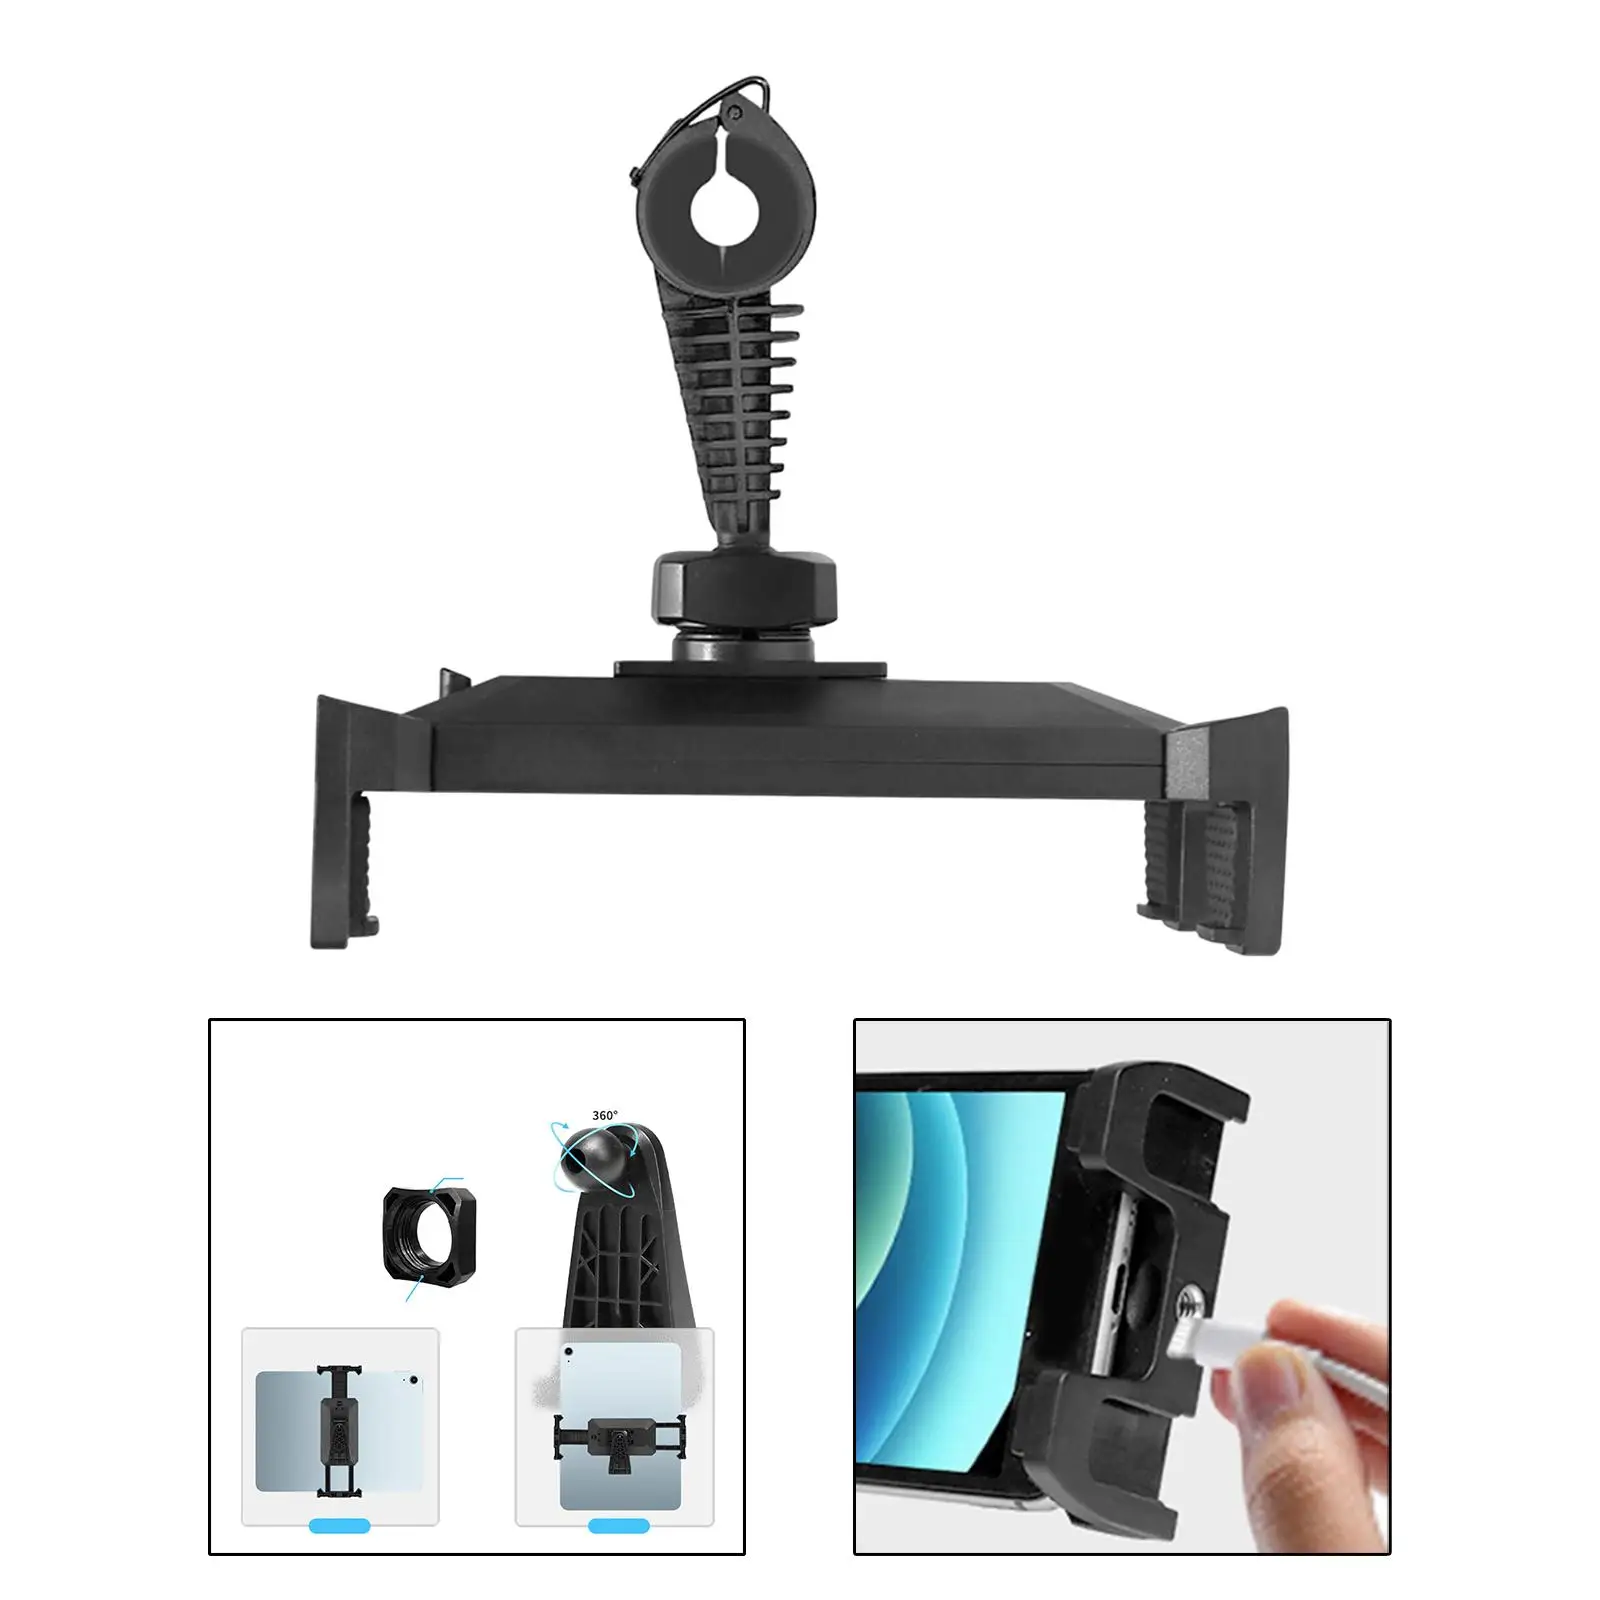 360 Rotation Tablet Clamp Mount Stand for Exercise Bicycle Compact Professional Easy to Mount & Position Instant Setup & Removal